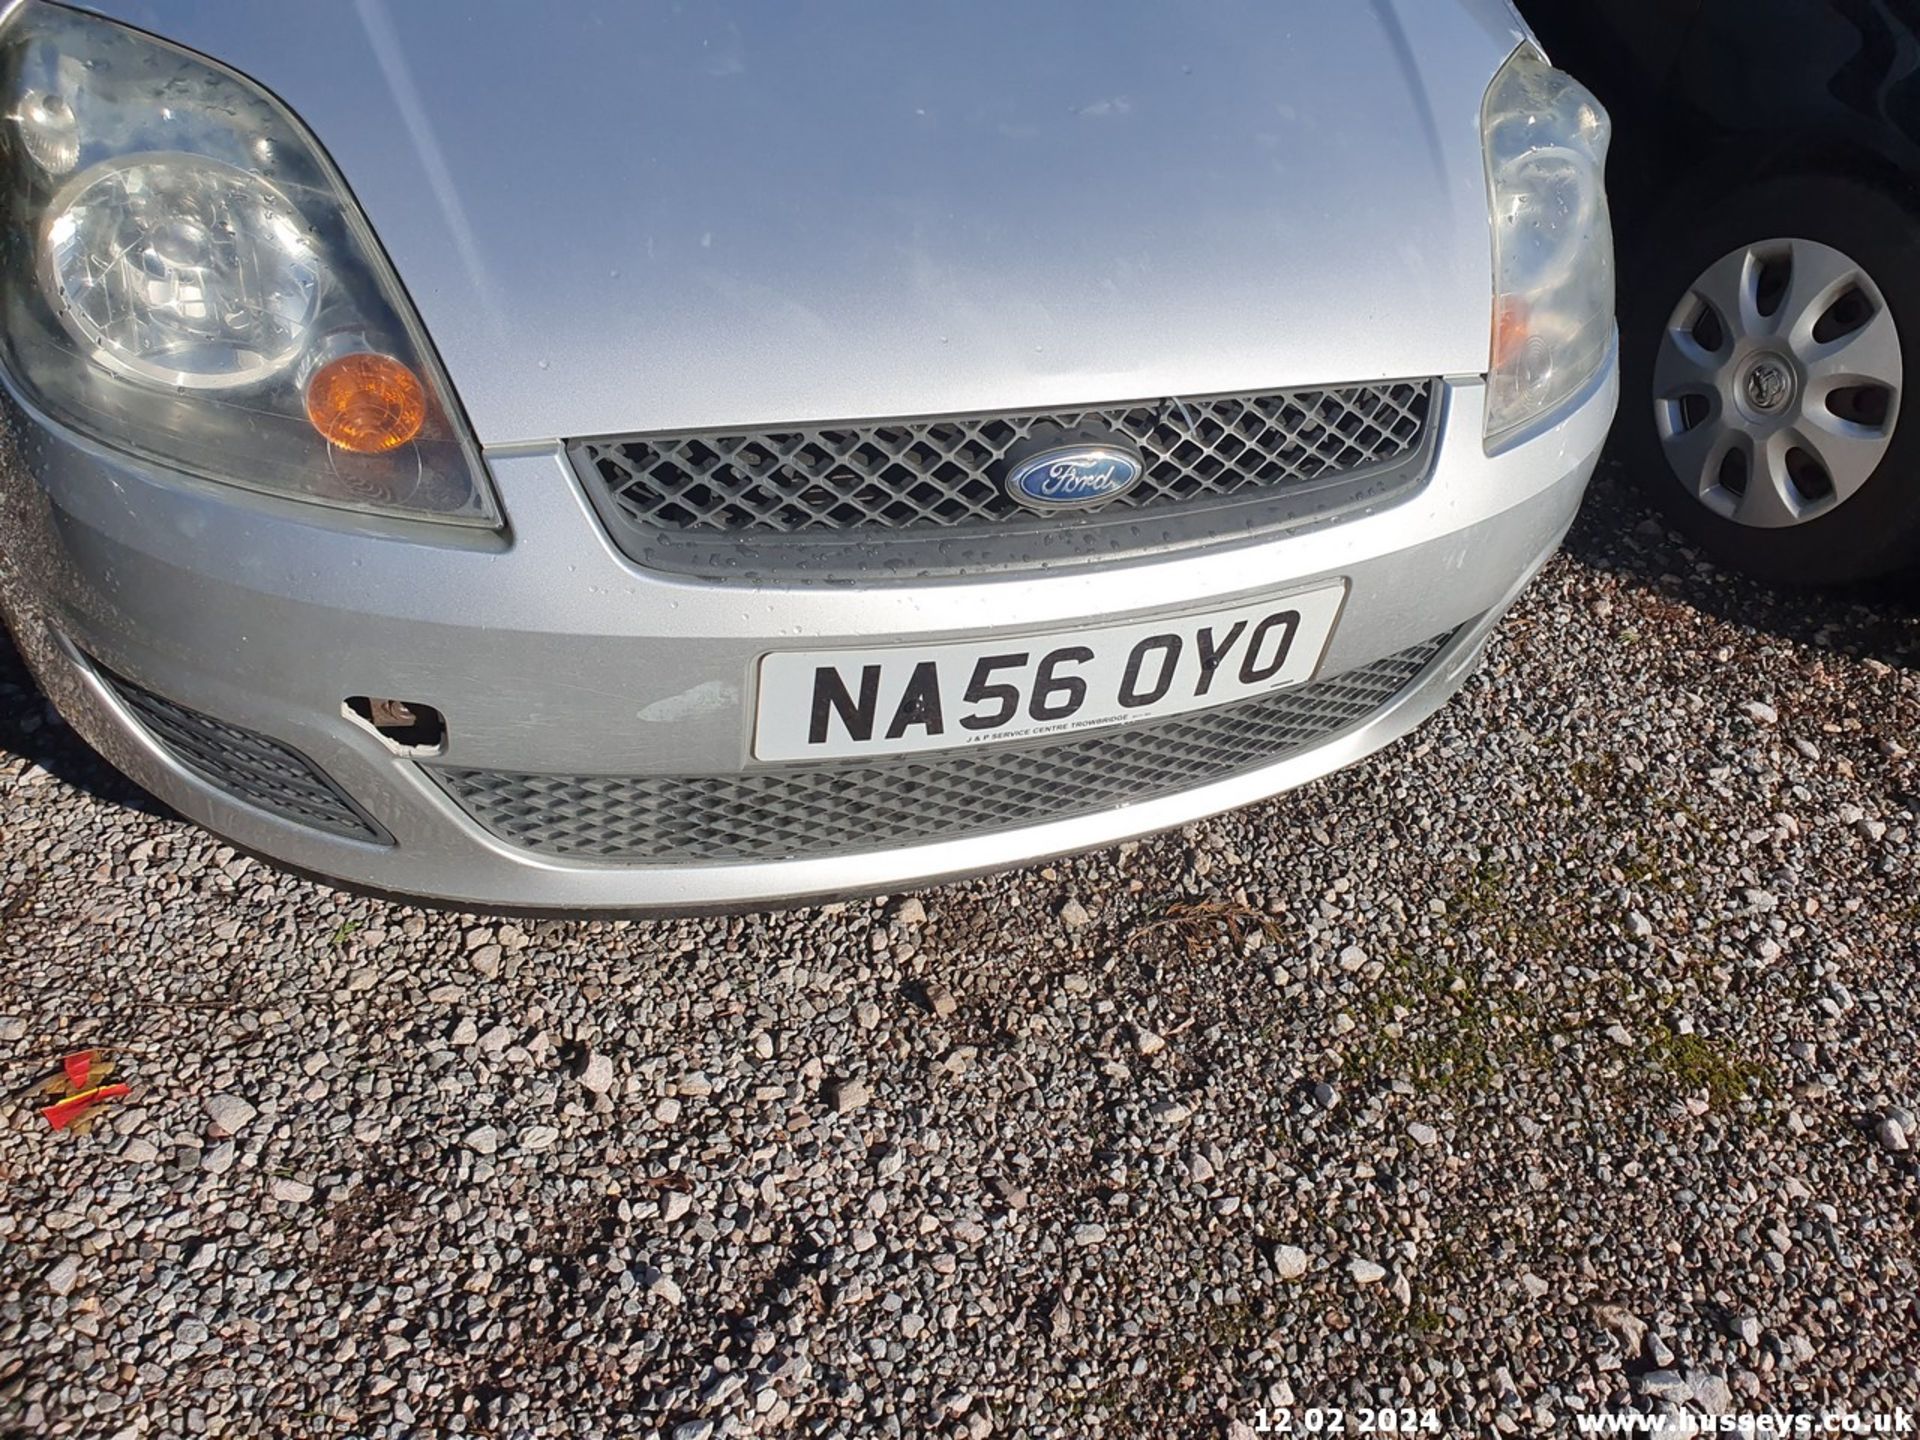 06/56 FORD FIESTA STYLE TDCI - 1399cc 5dr Hatchback (Silver) - Image 20 of 39